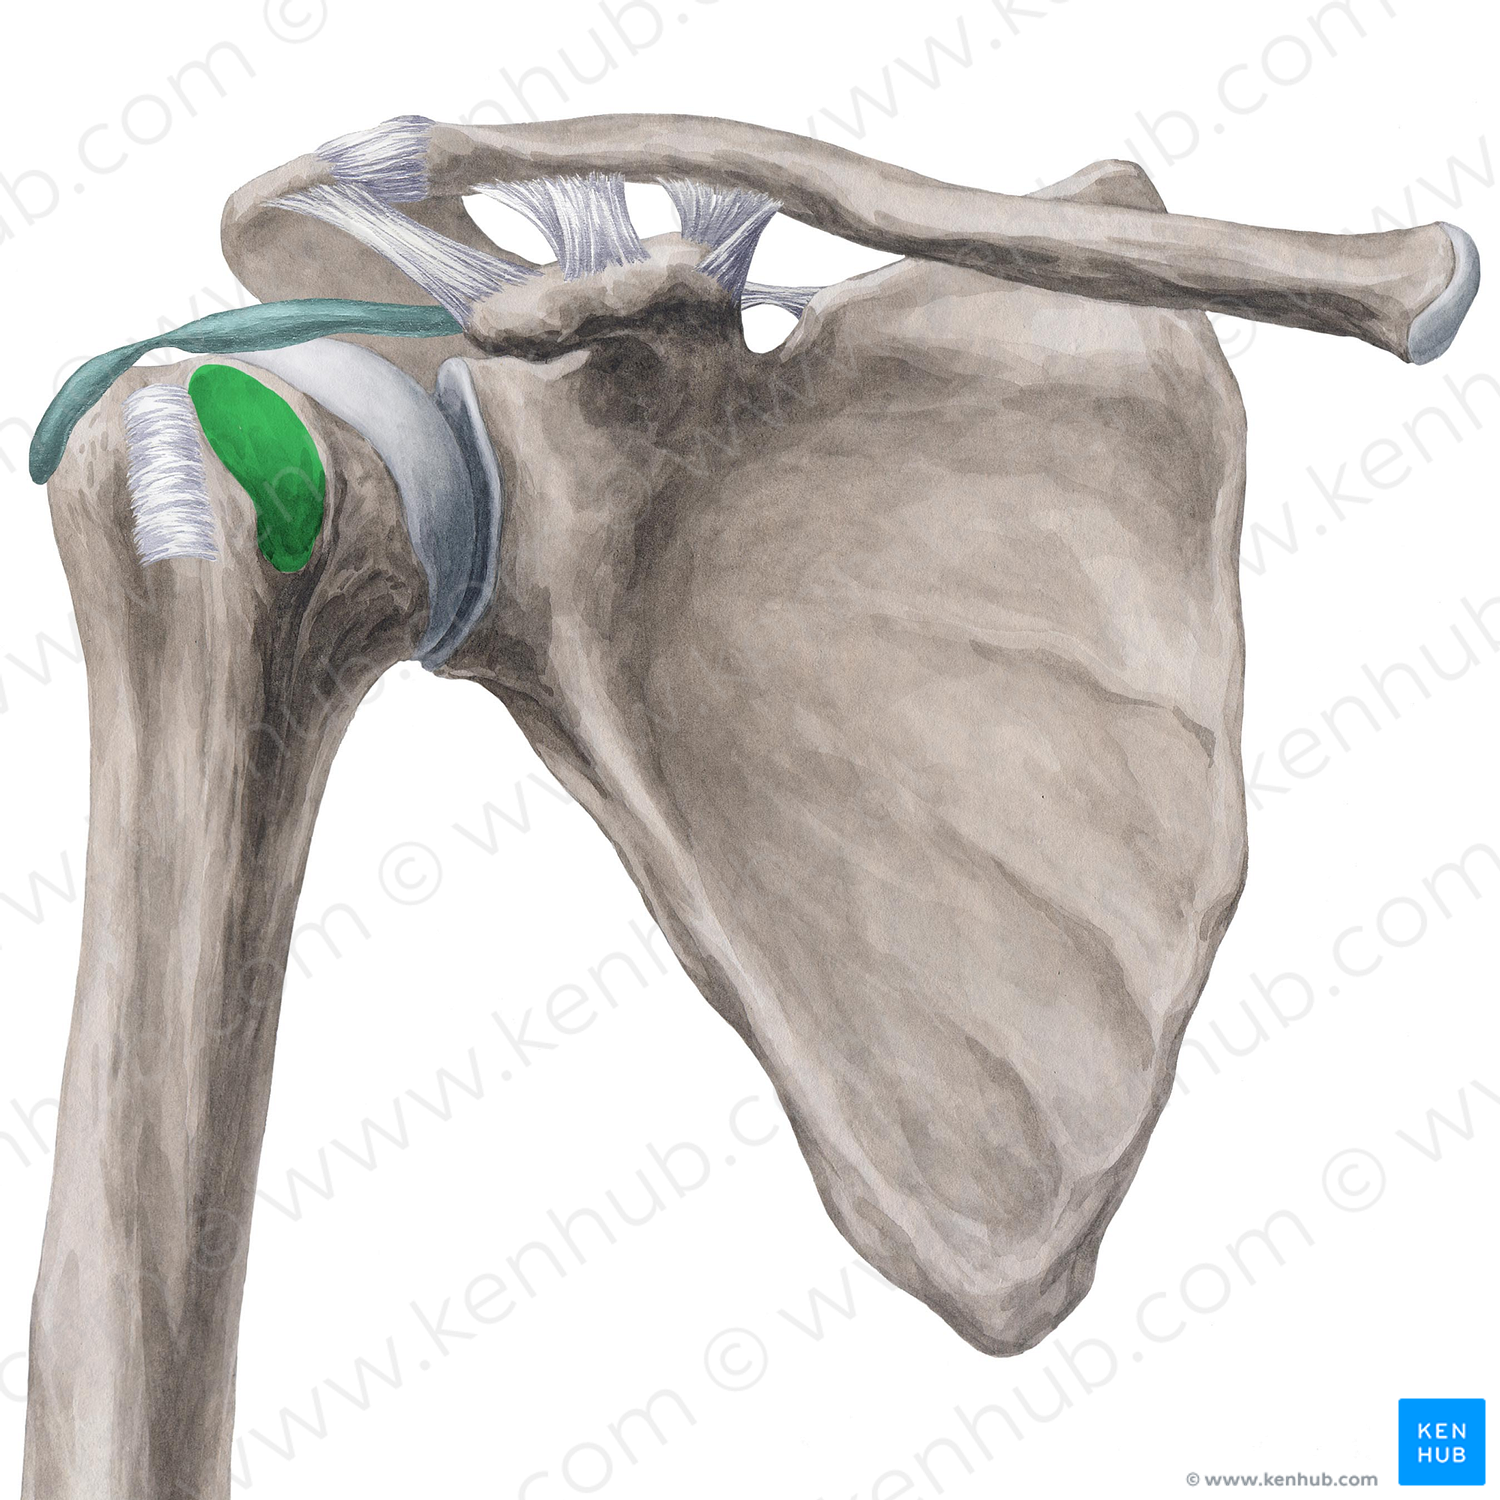 Lesser tubercle of humerus (#9739)